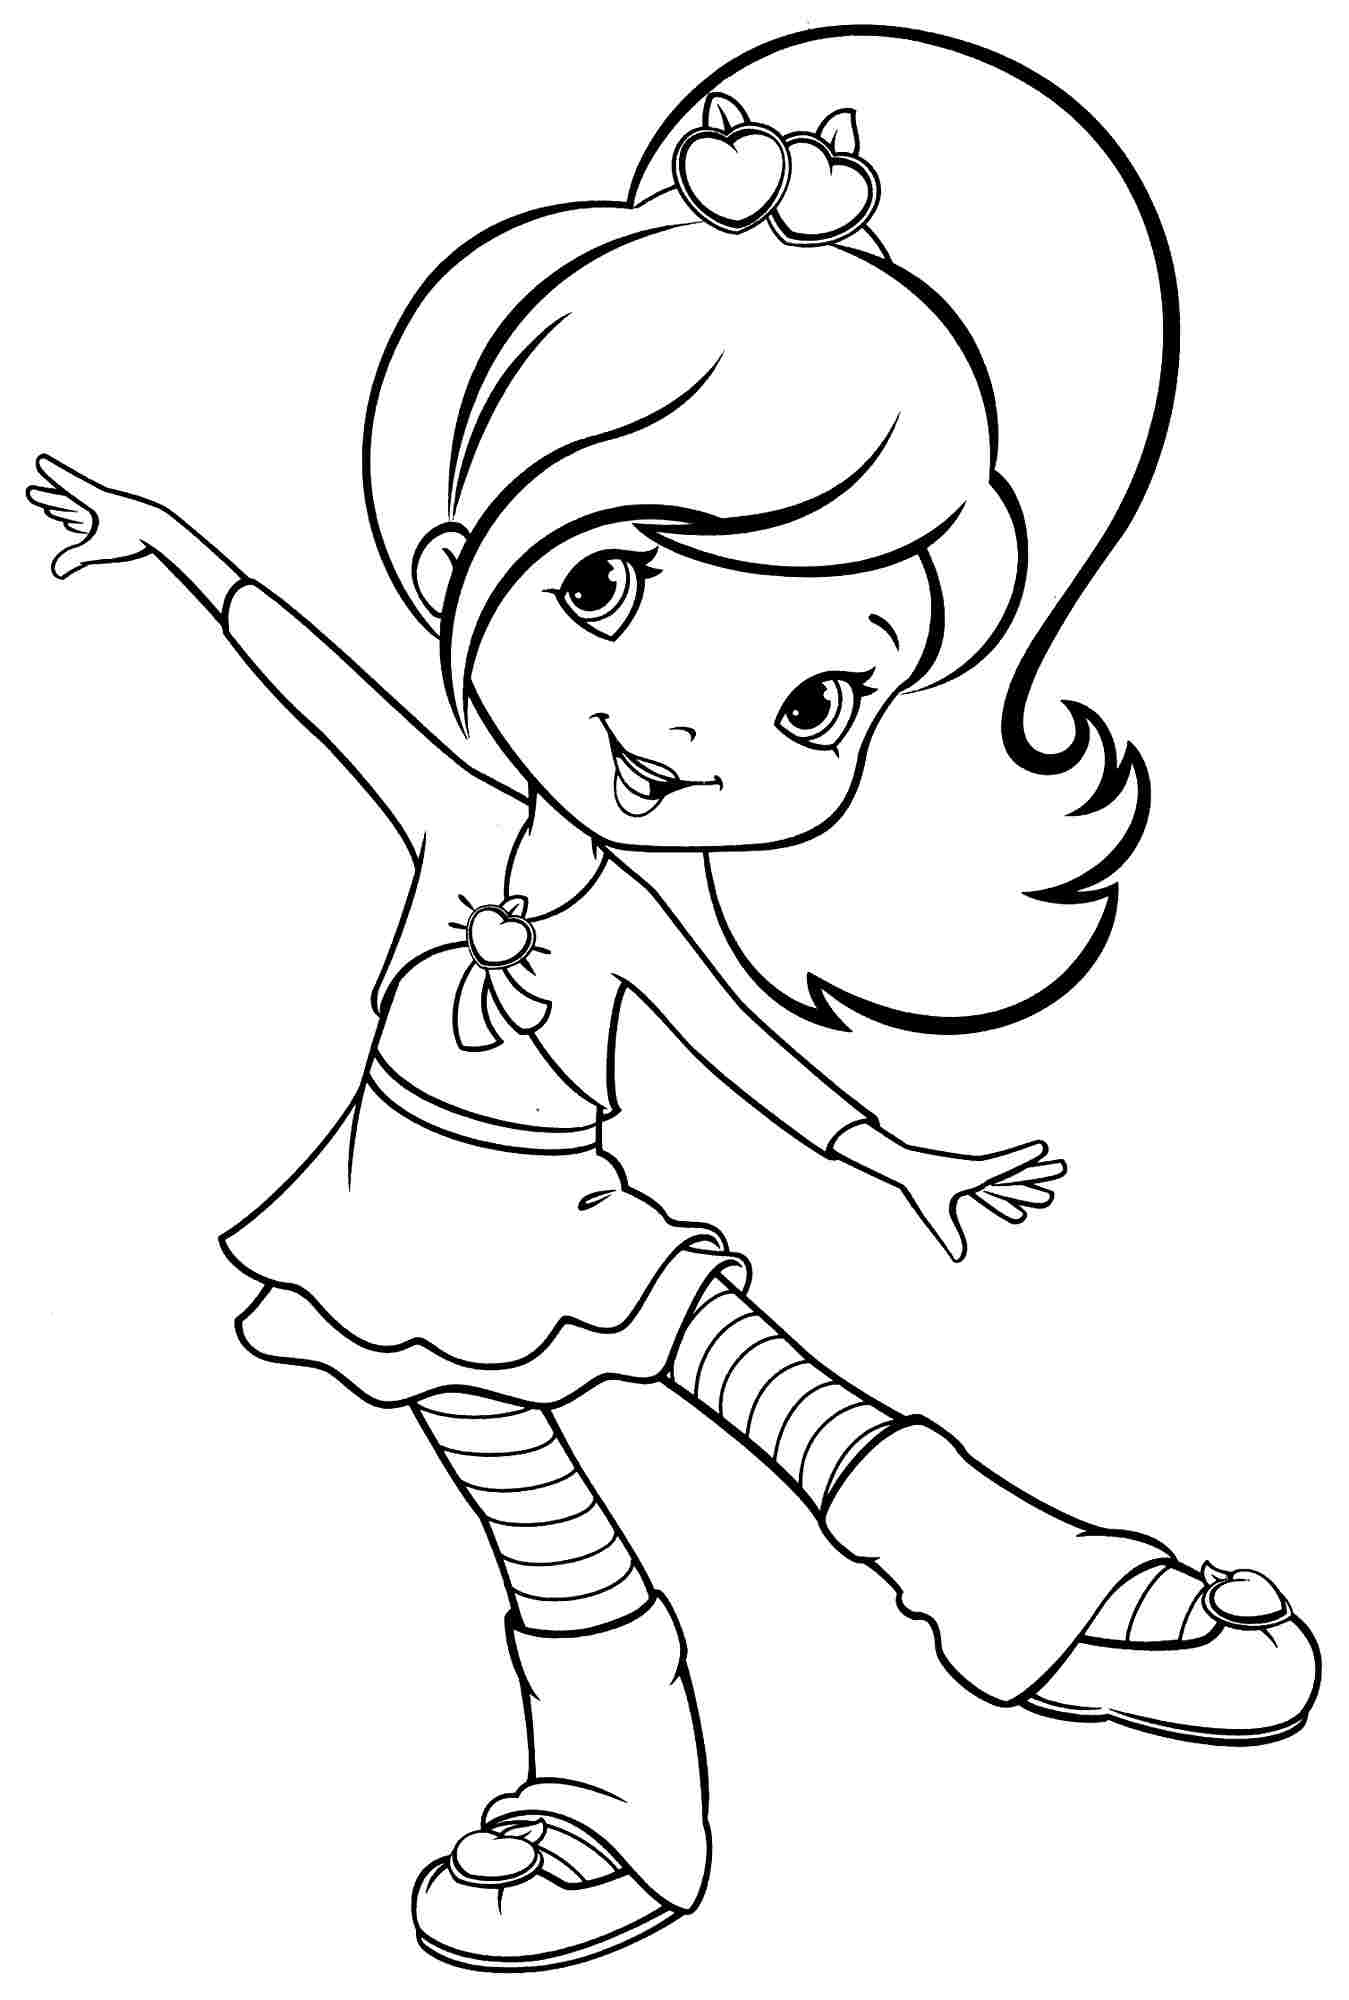 Download Coloring Pages for Girls - Best Coloring Pages For Kids